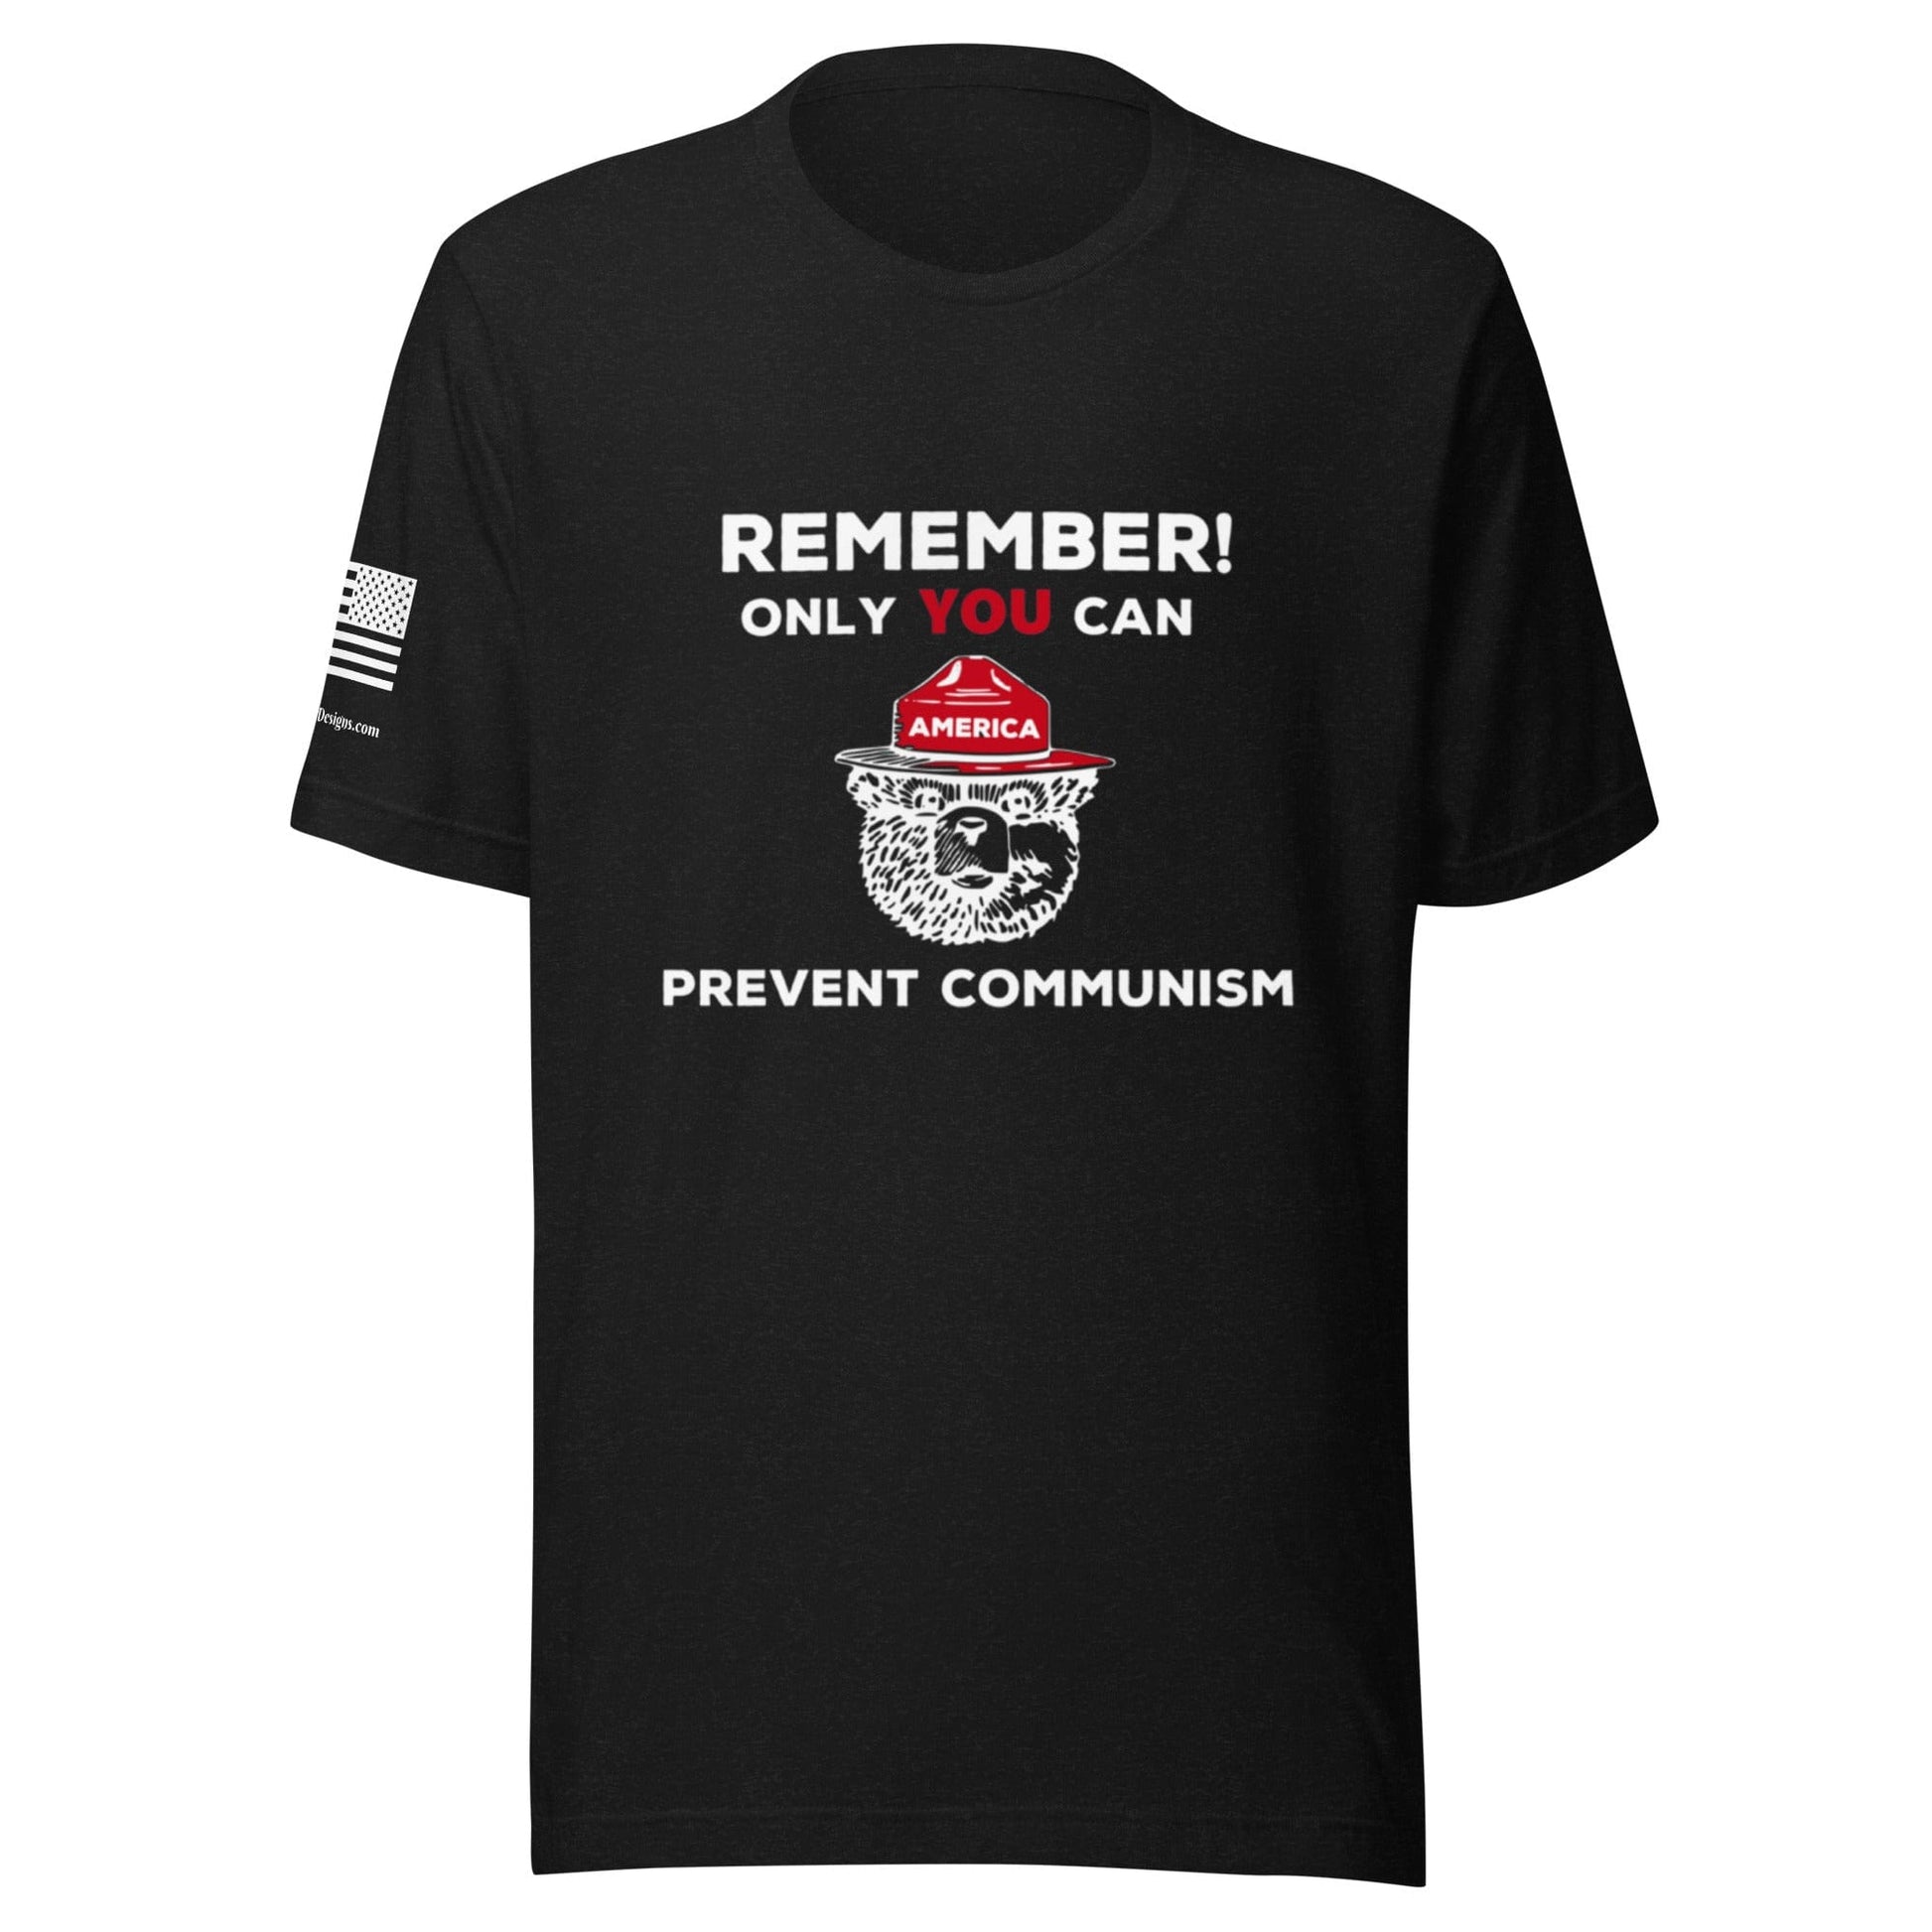 FreedomKat Designs Black Heather / S Only You Can Prevent Communism